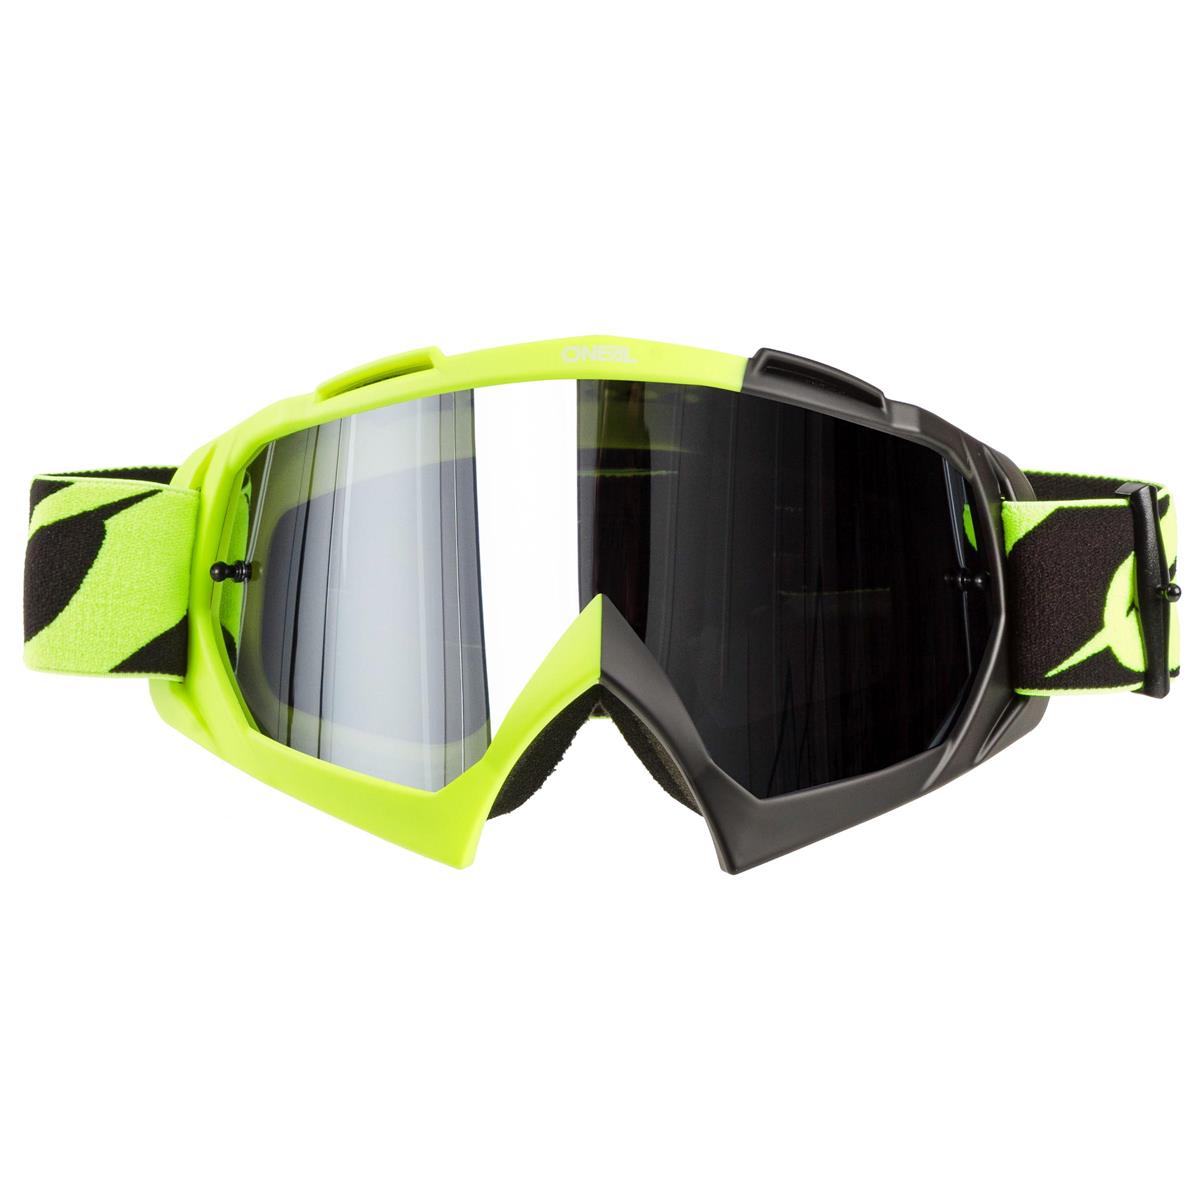 BLUR B-10 TWO FACE GOGGLE BLK/WHT O'Neal 6024-201